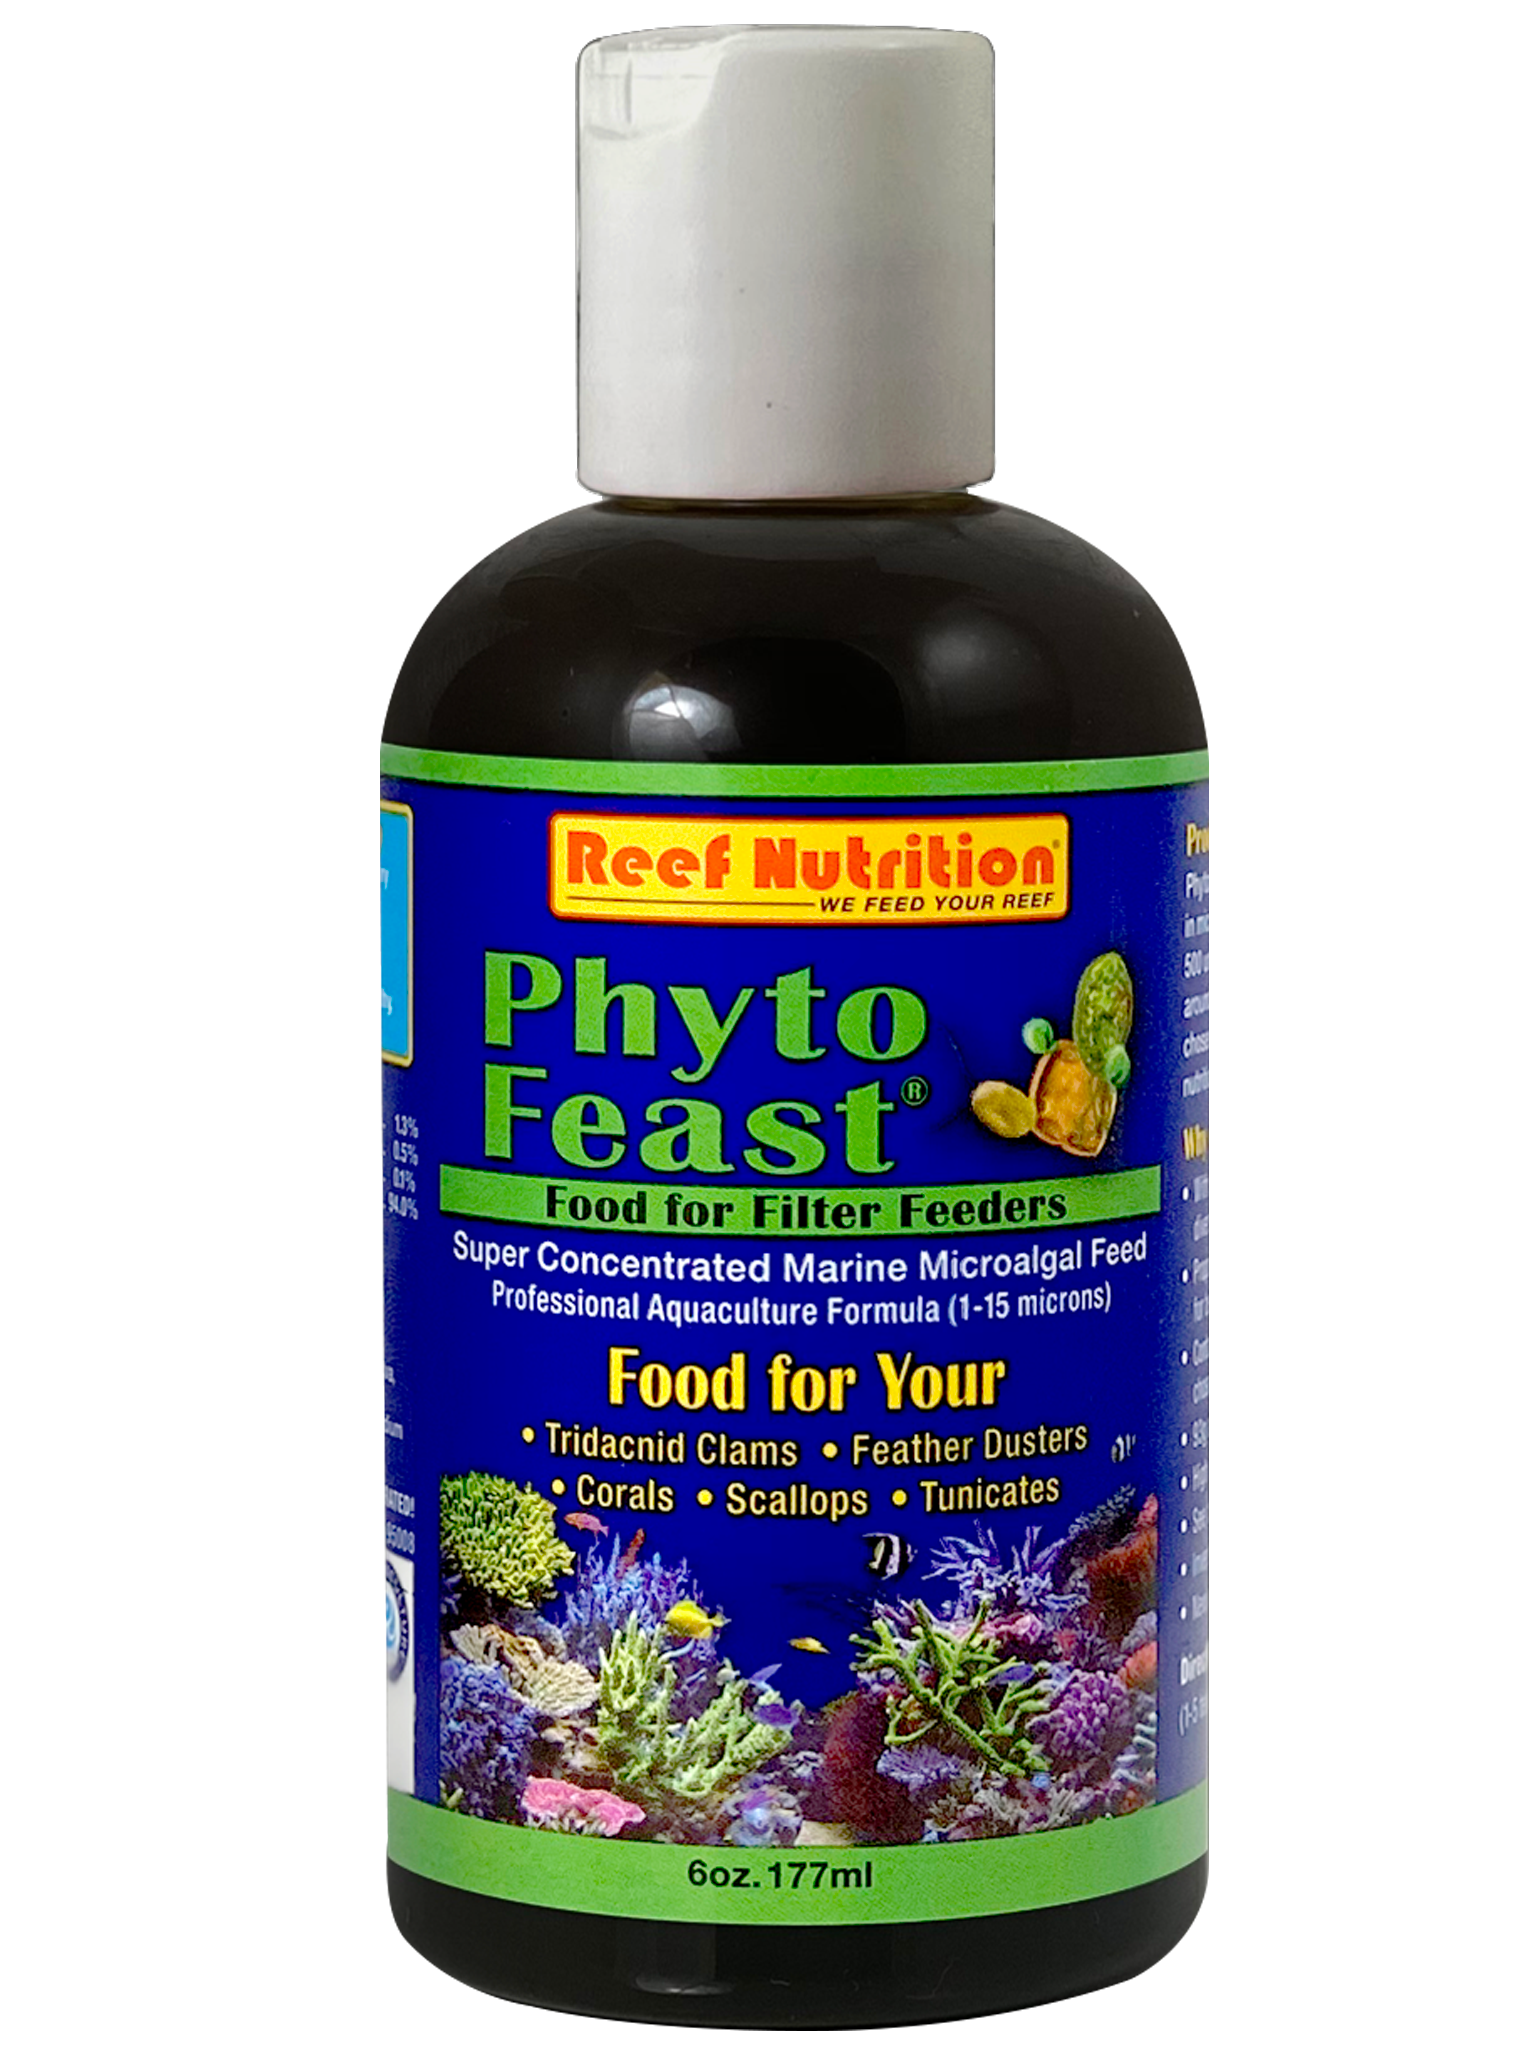 Reef Nutrition Phyto-Feast Live - 6oz